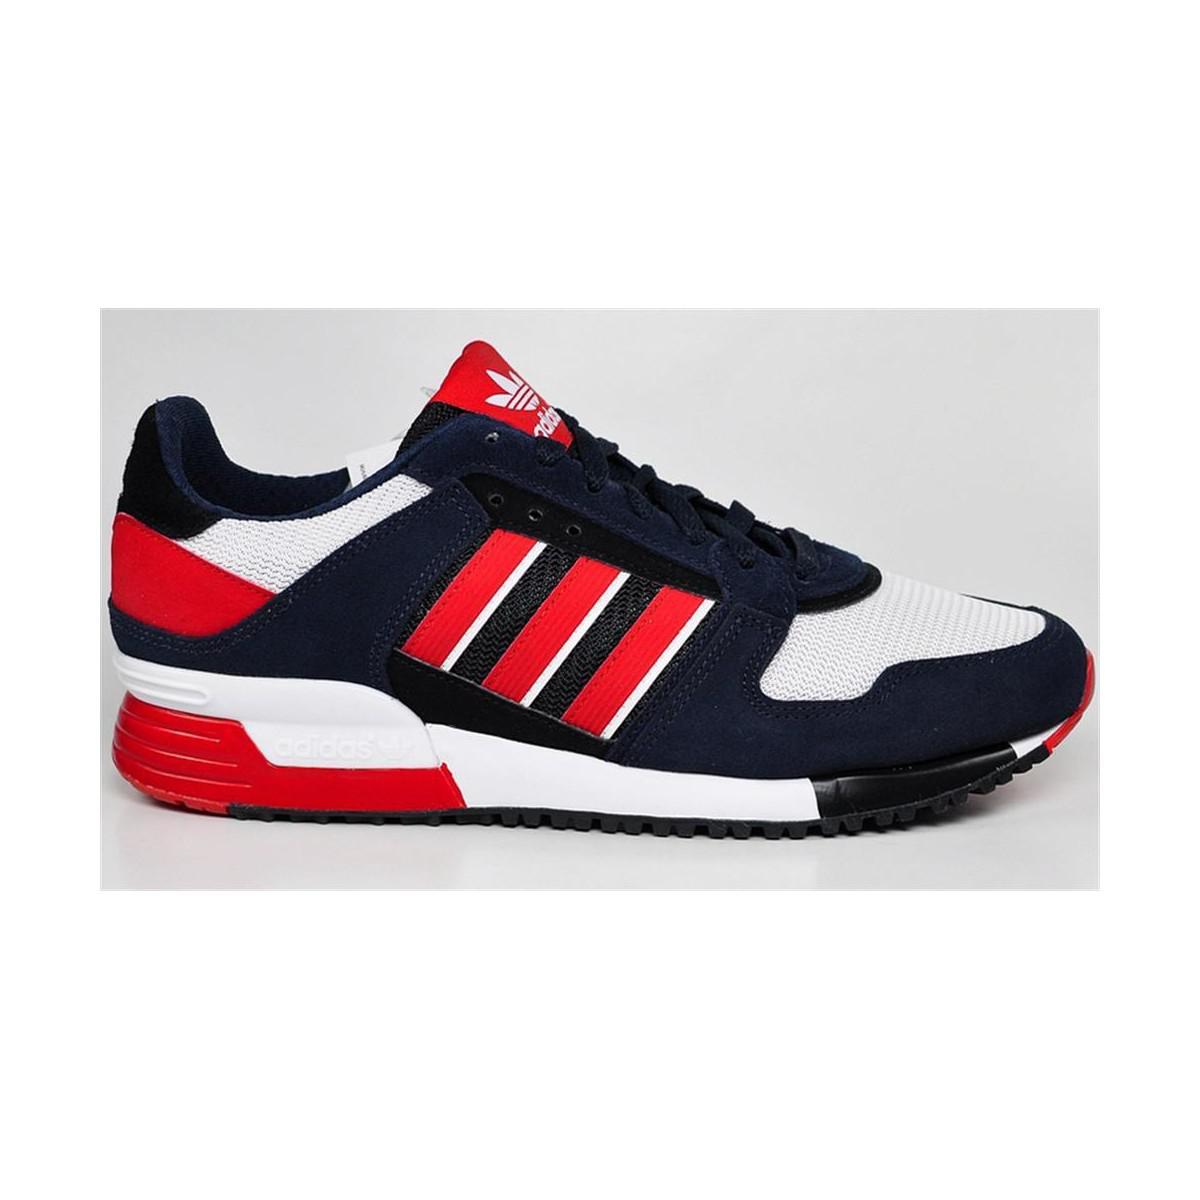 adidas zx 630 trainers